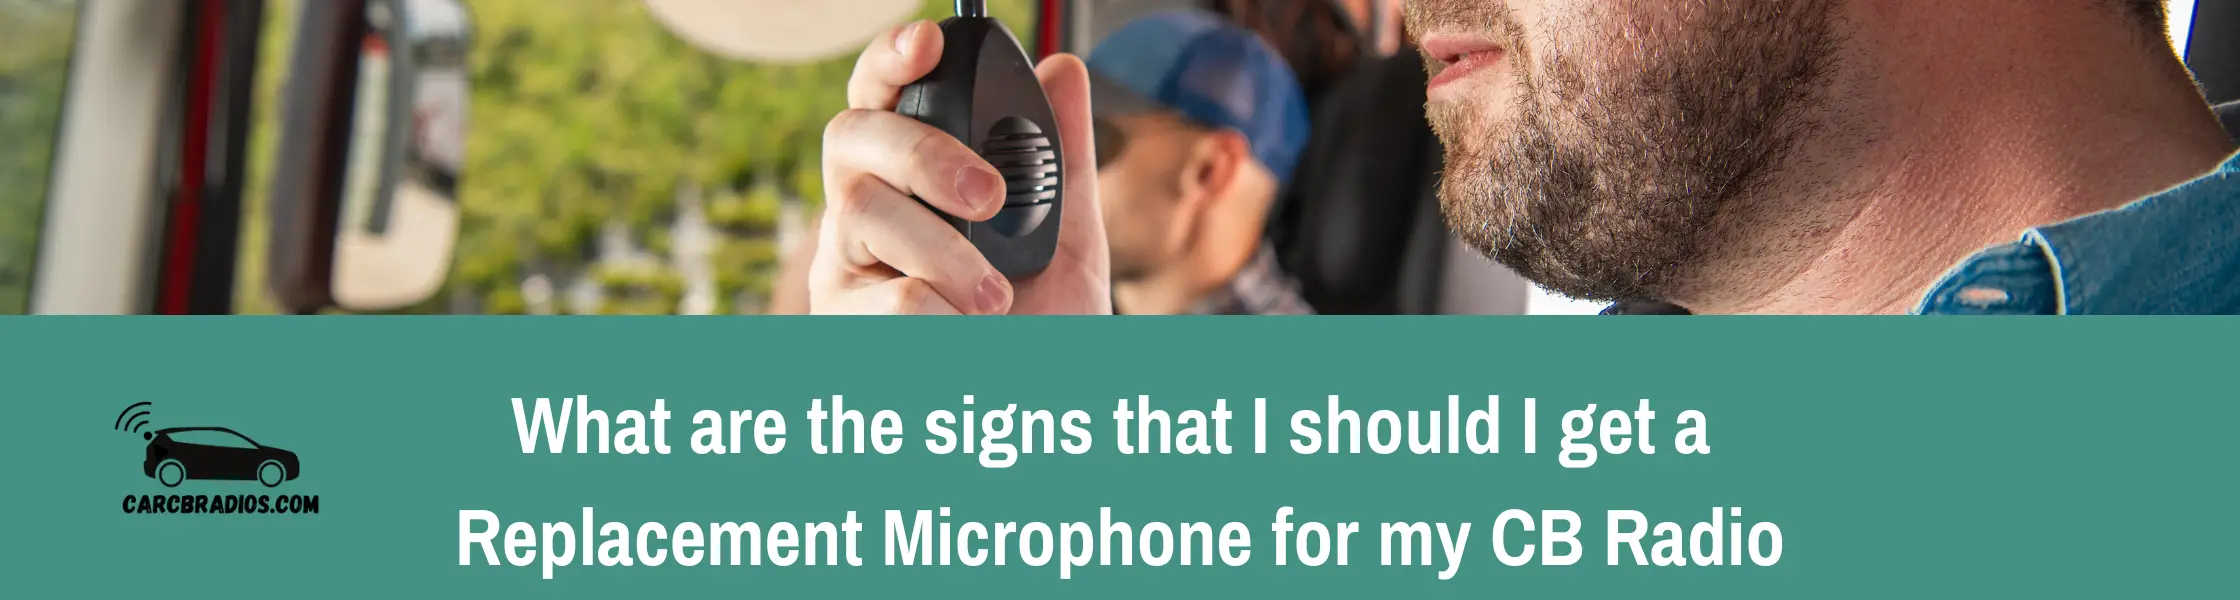 What are the signs that I should I get a Replacement Microphone for my CB Radio